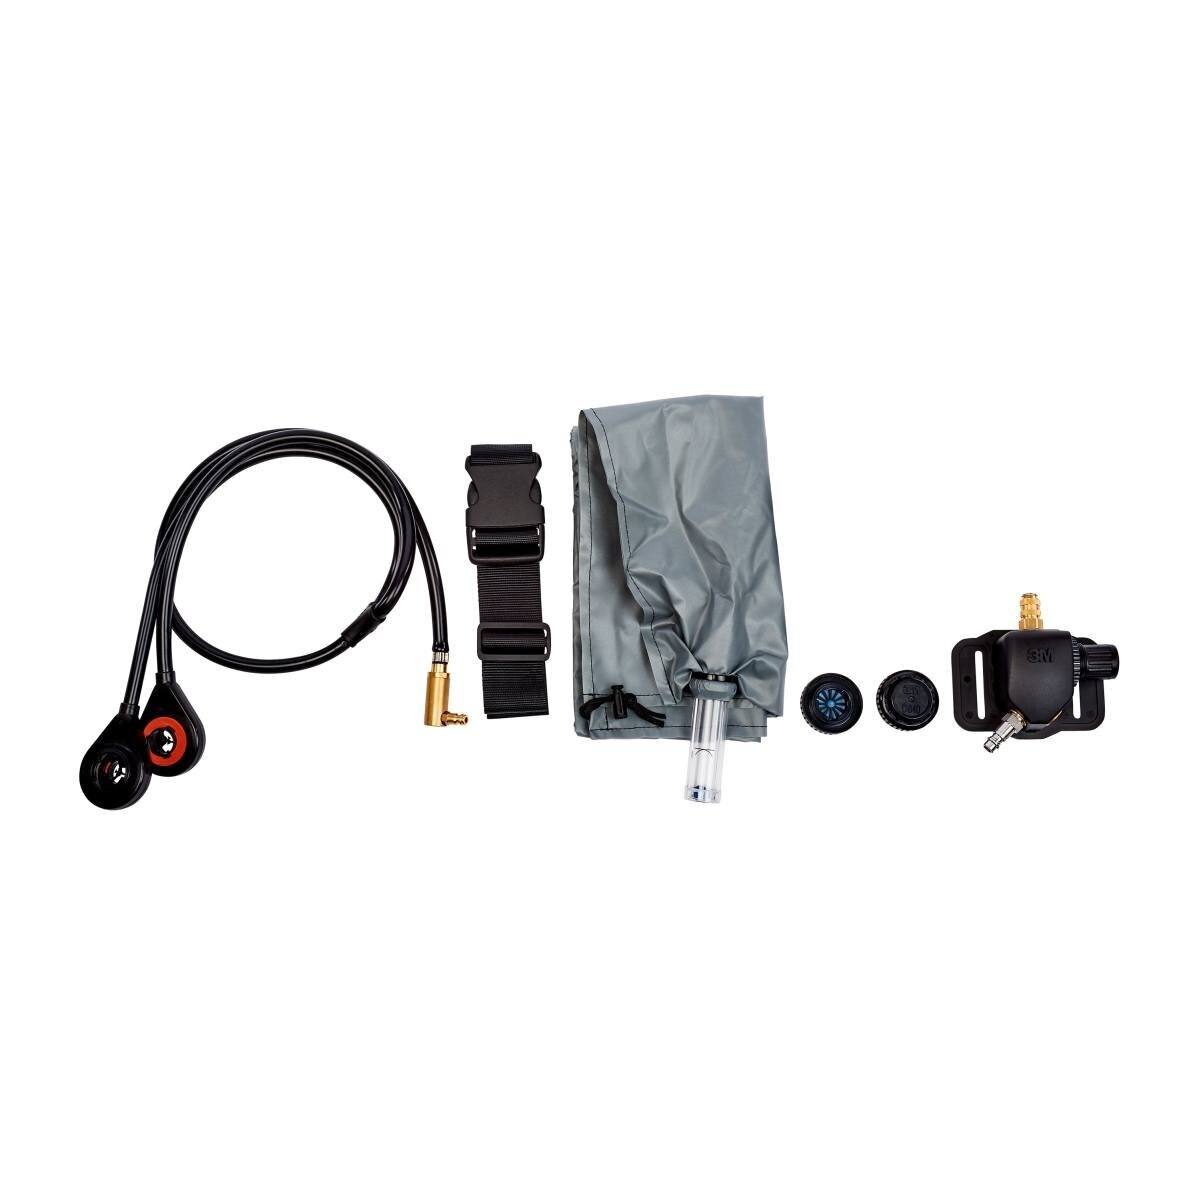 3M Compressed air system S-200+ basic unit consisting of: Control unit incl. CEJN plug nipple, belt 301-00-62P, breathing air hose S-222, pressure relief valves C-340 and air flow control bag FCB-01